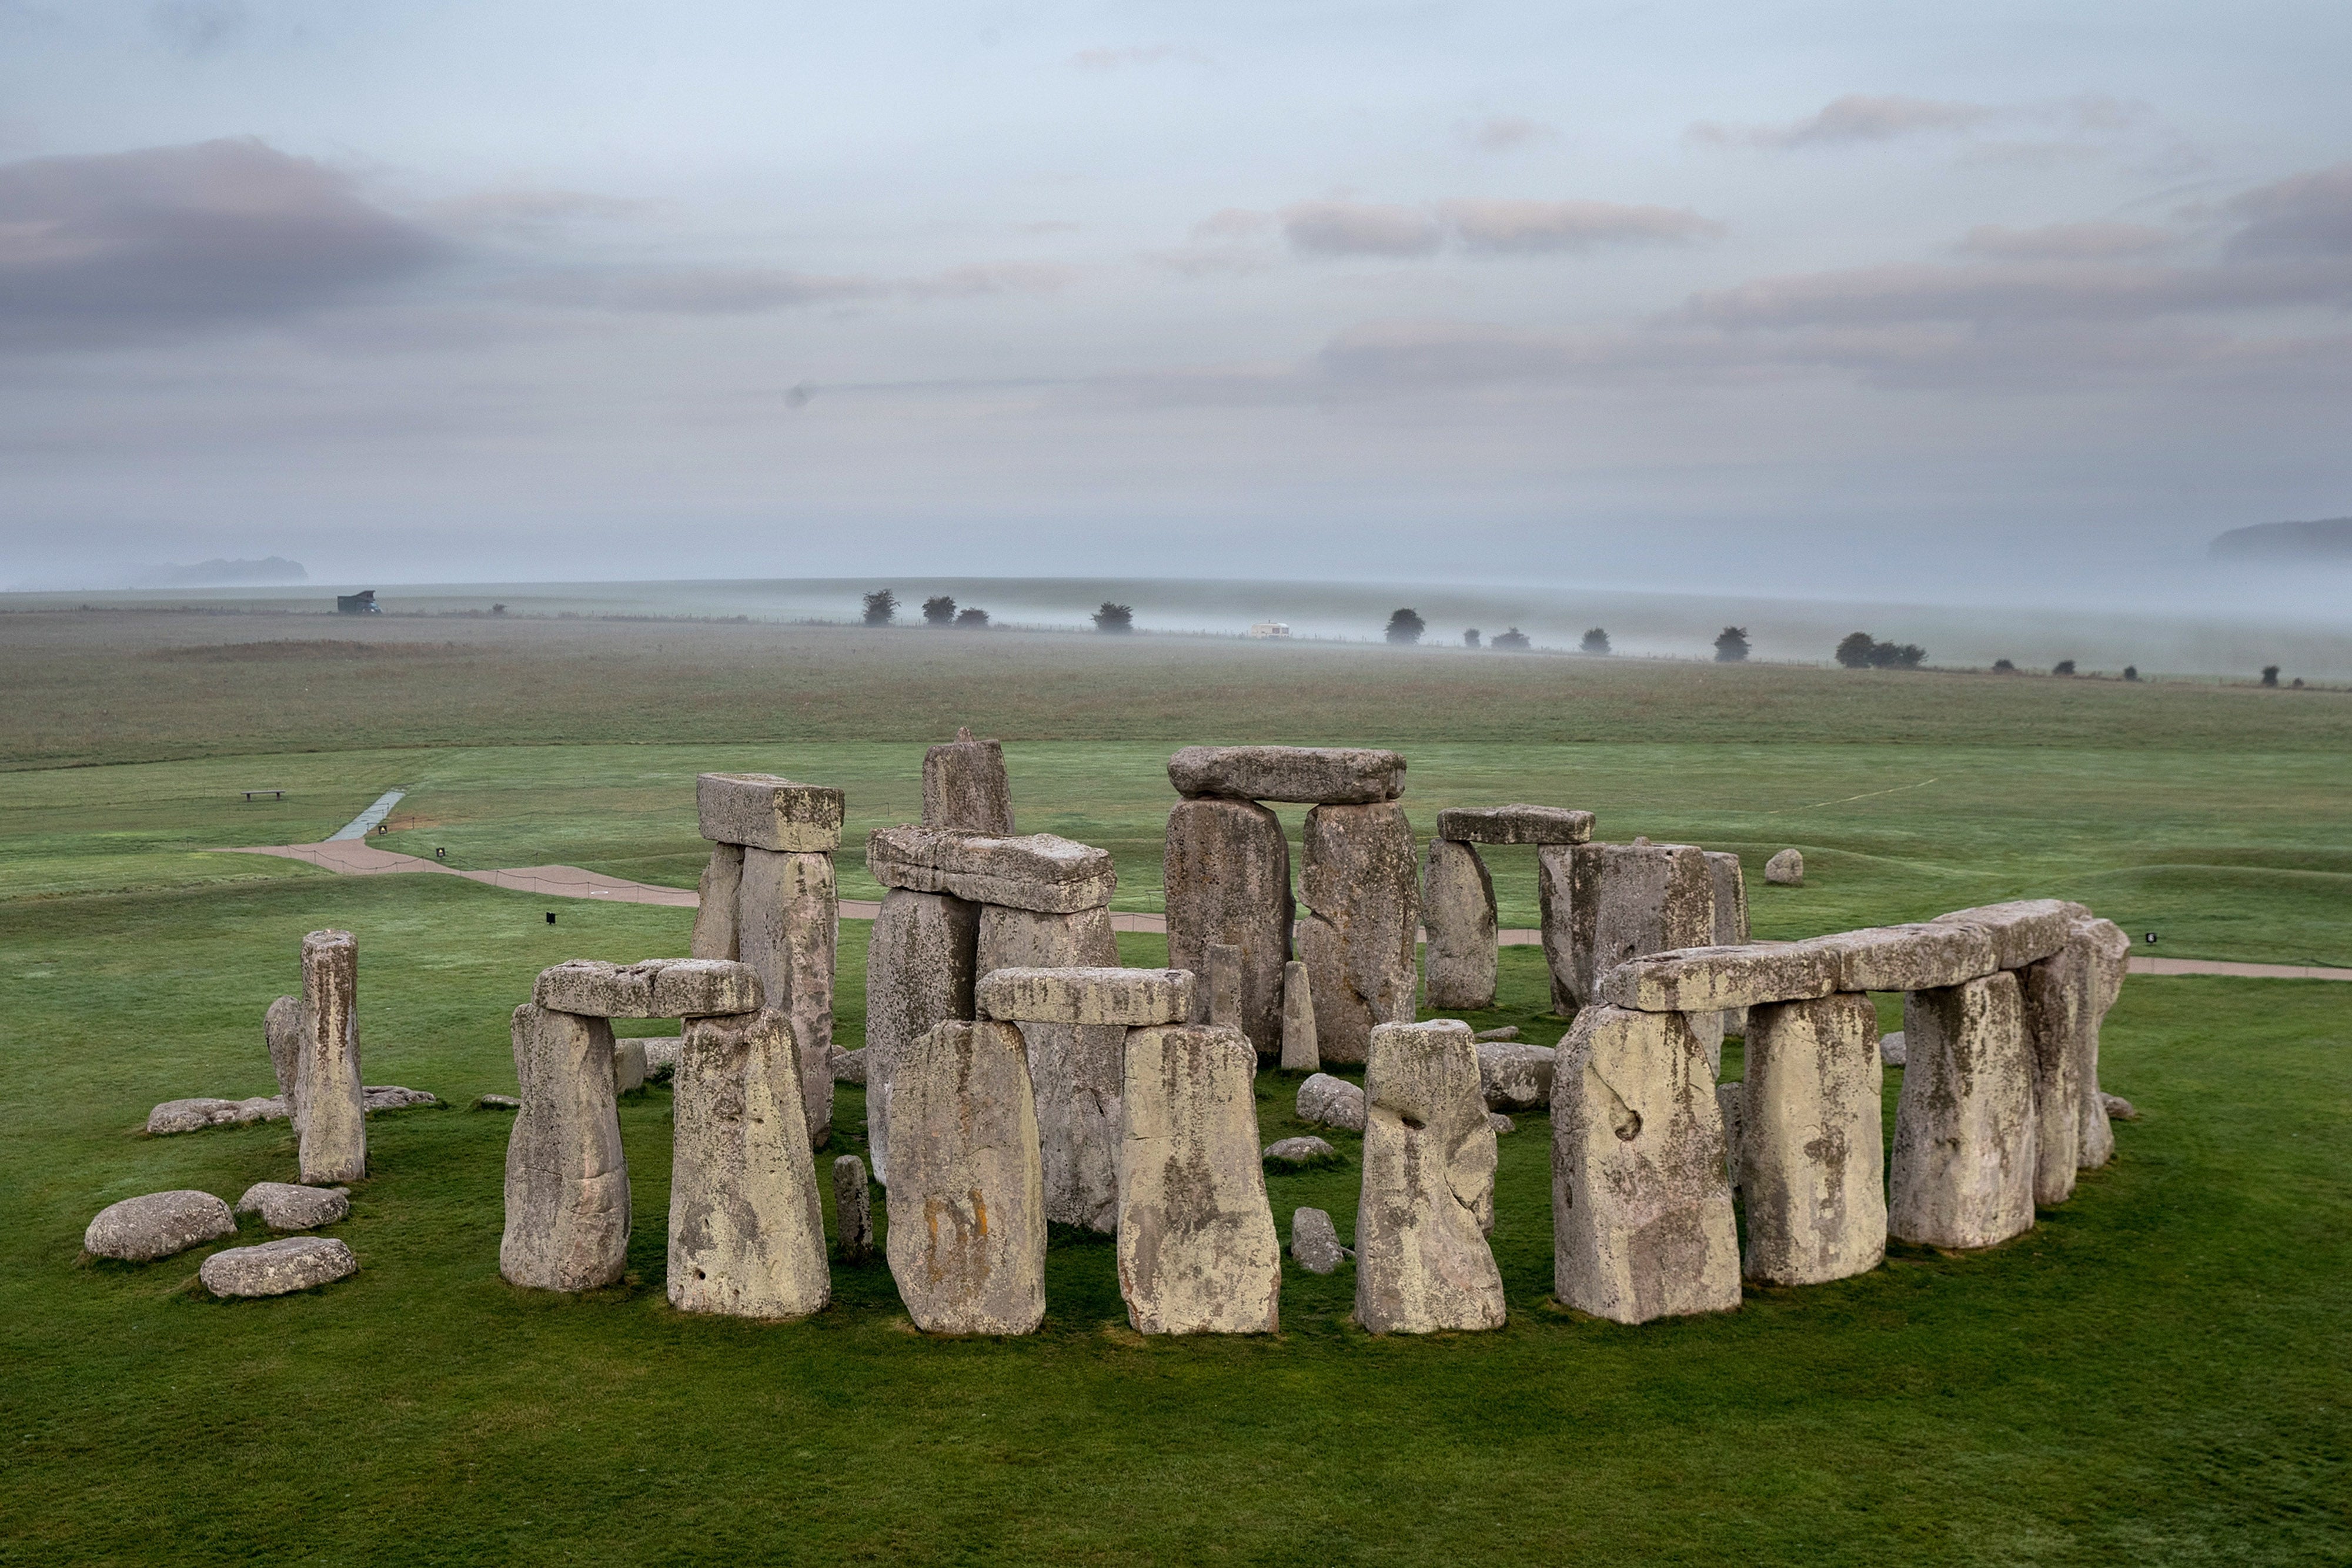 Stonehenge is the most famous monument of Neolithic Britain